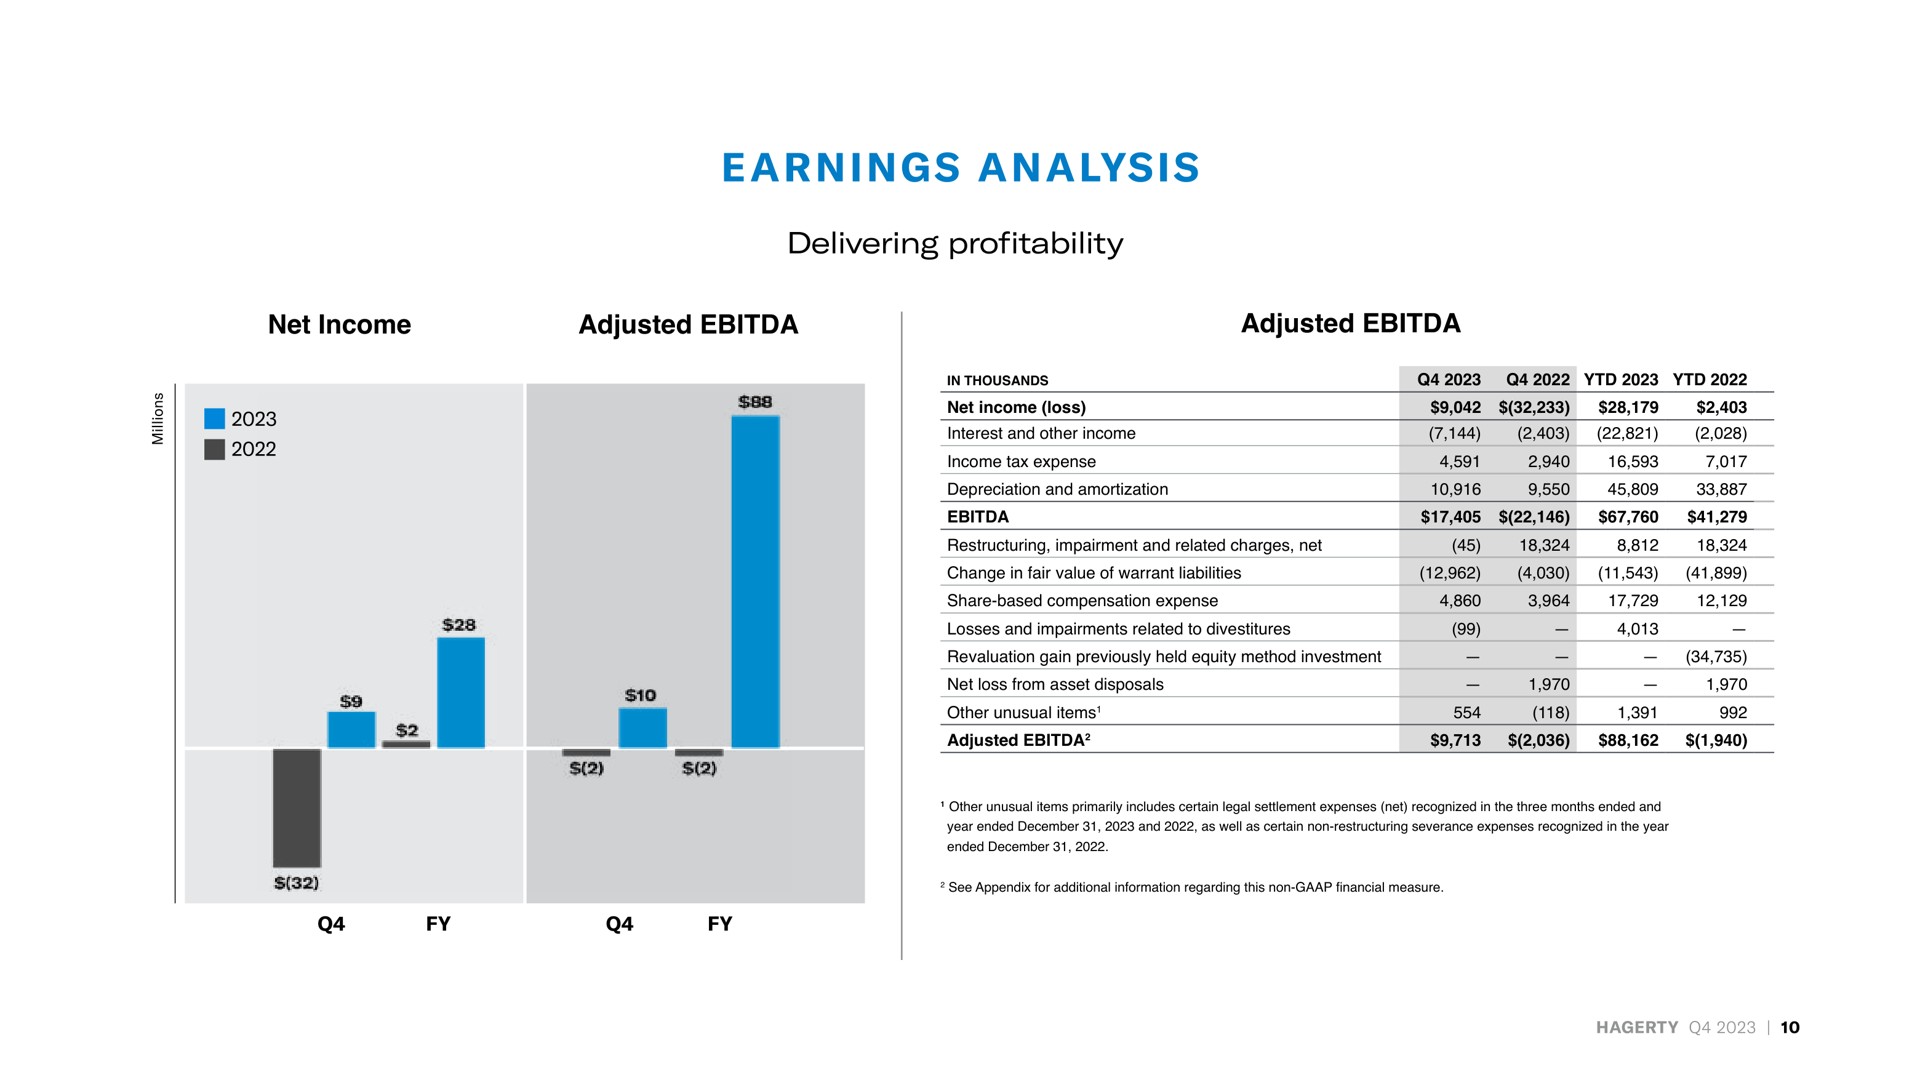 net income adjusted adjusted earnings analysis | Hagerty